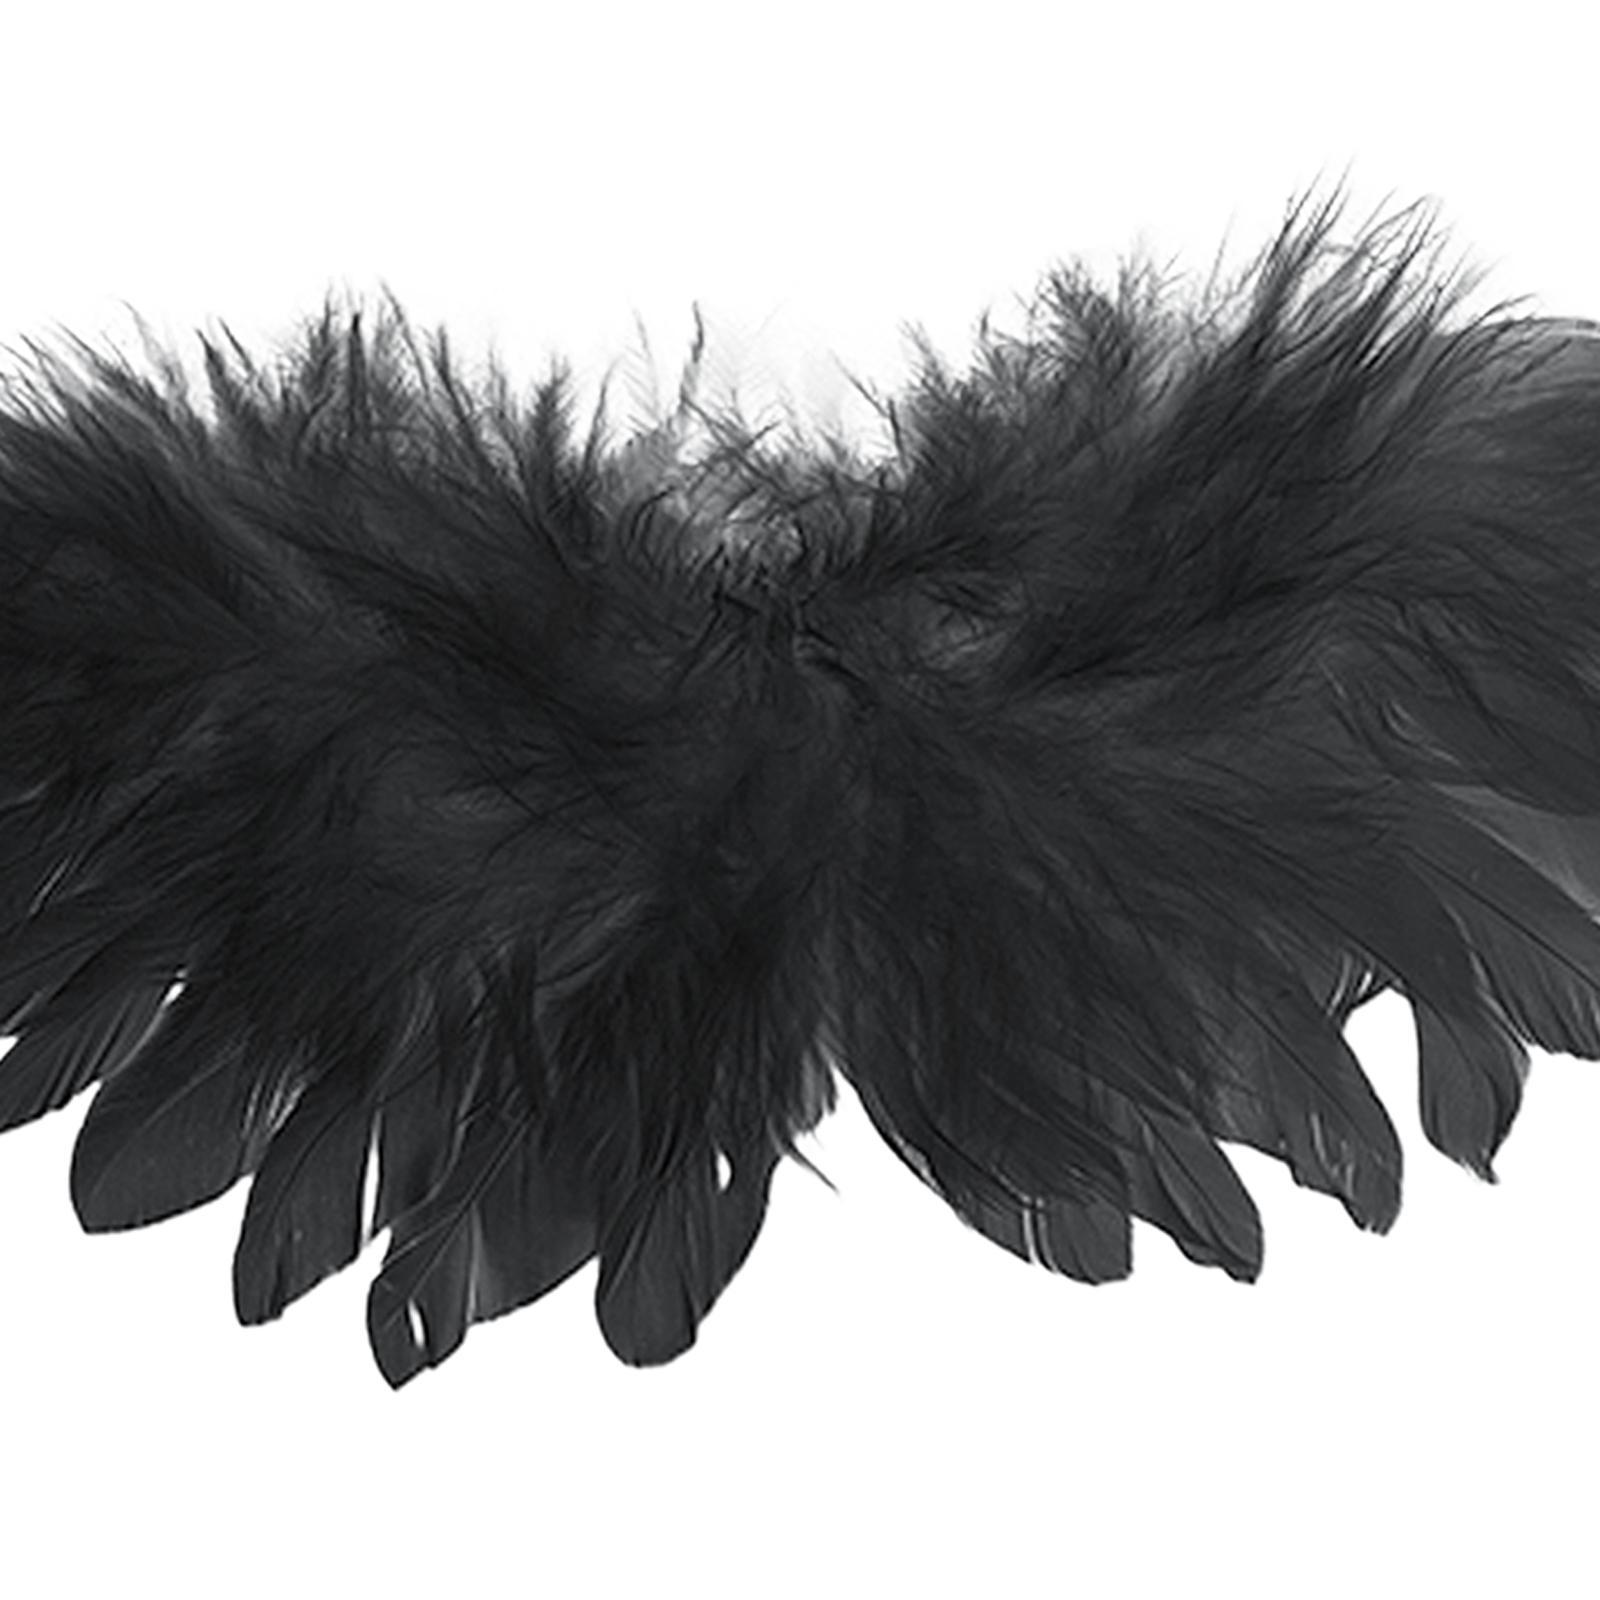 Novelty Wing Costume Accessory Costume Props for Festival Children Kids